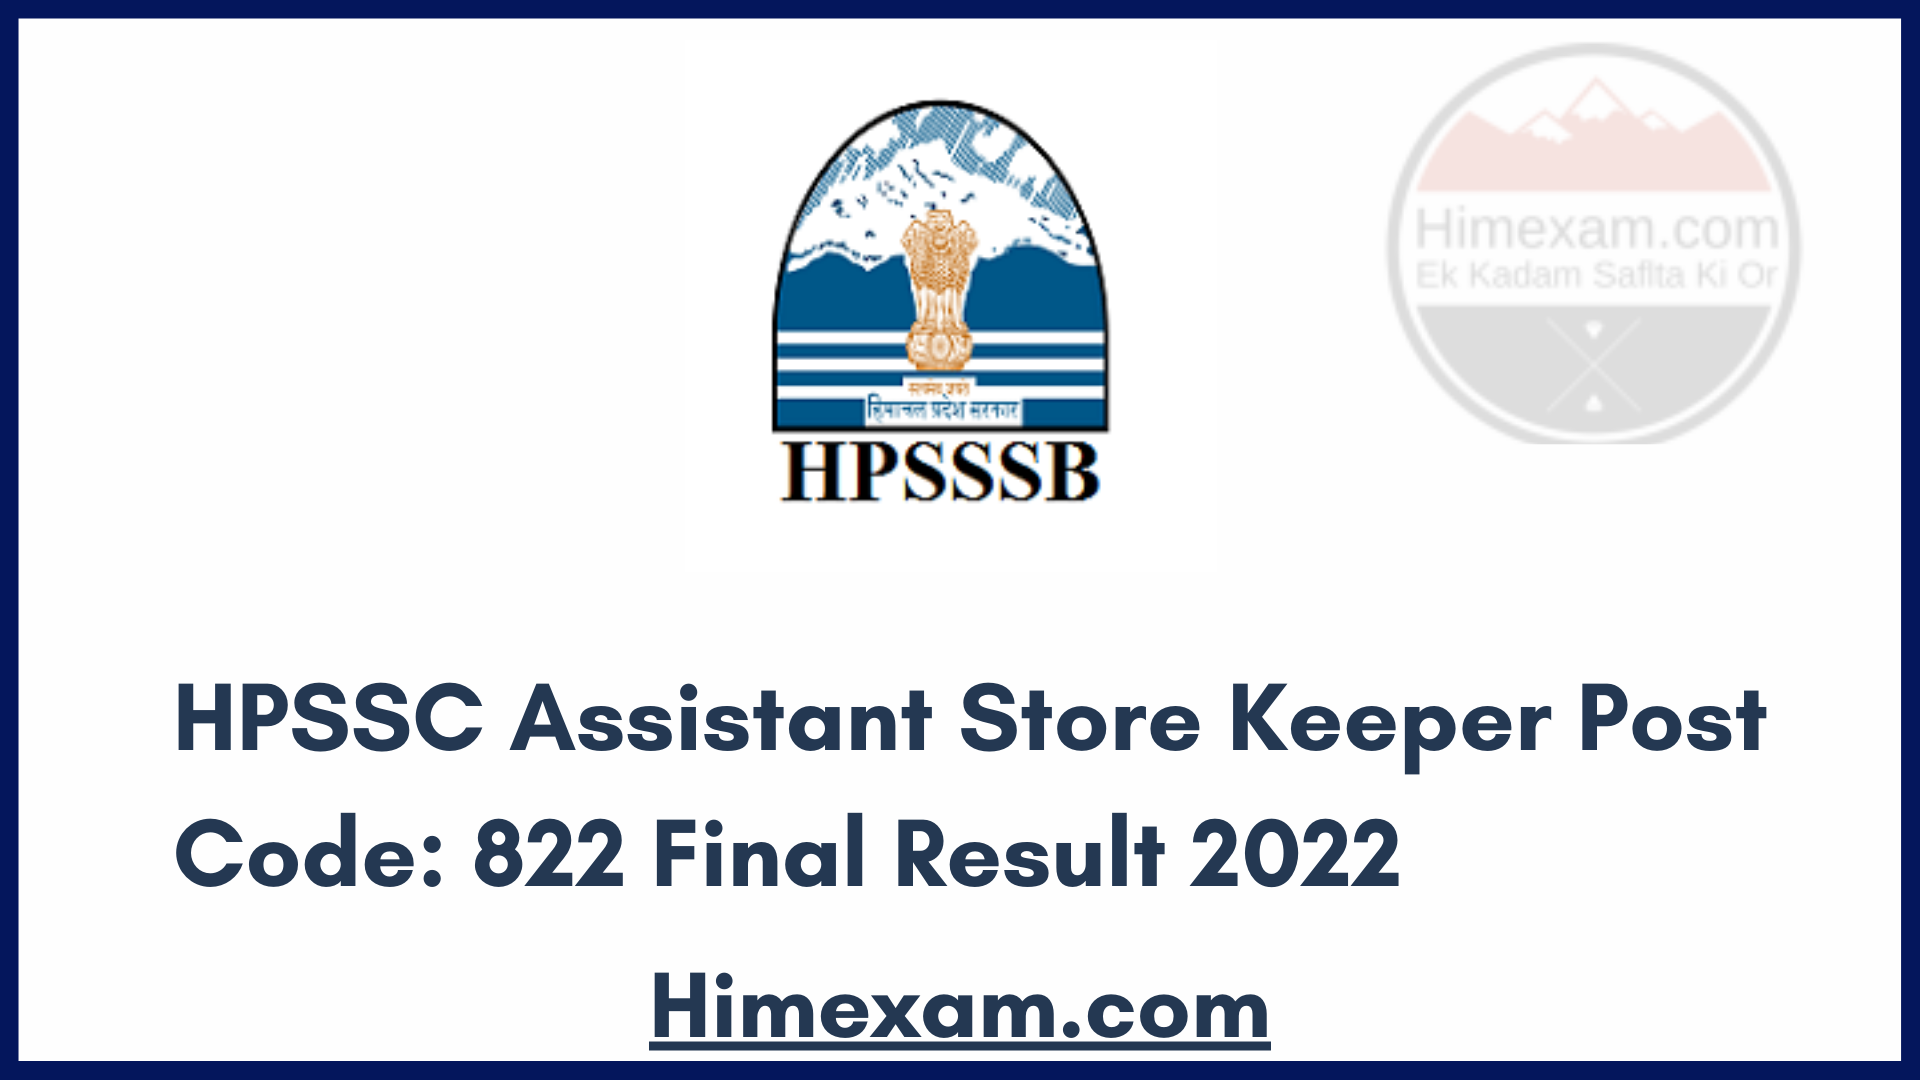 HPSSC Assistant Store Keeper Post Code: 822 Final Result 2022